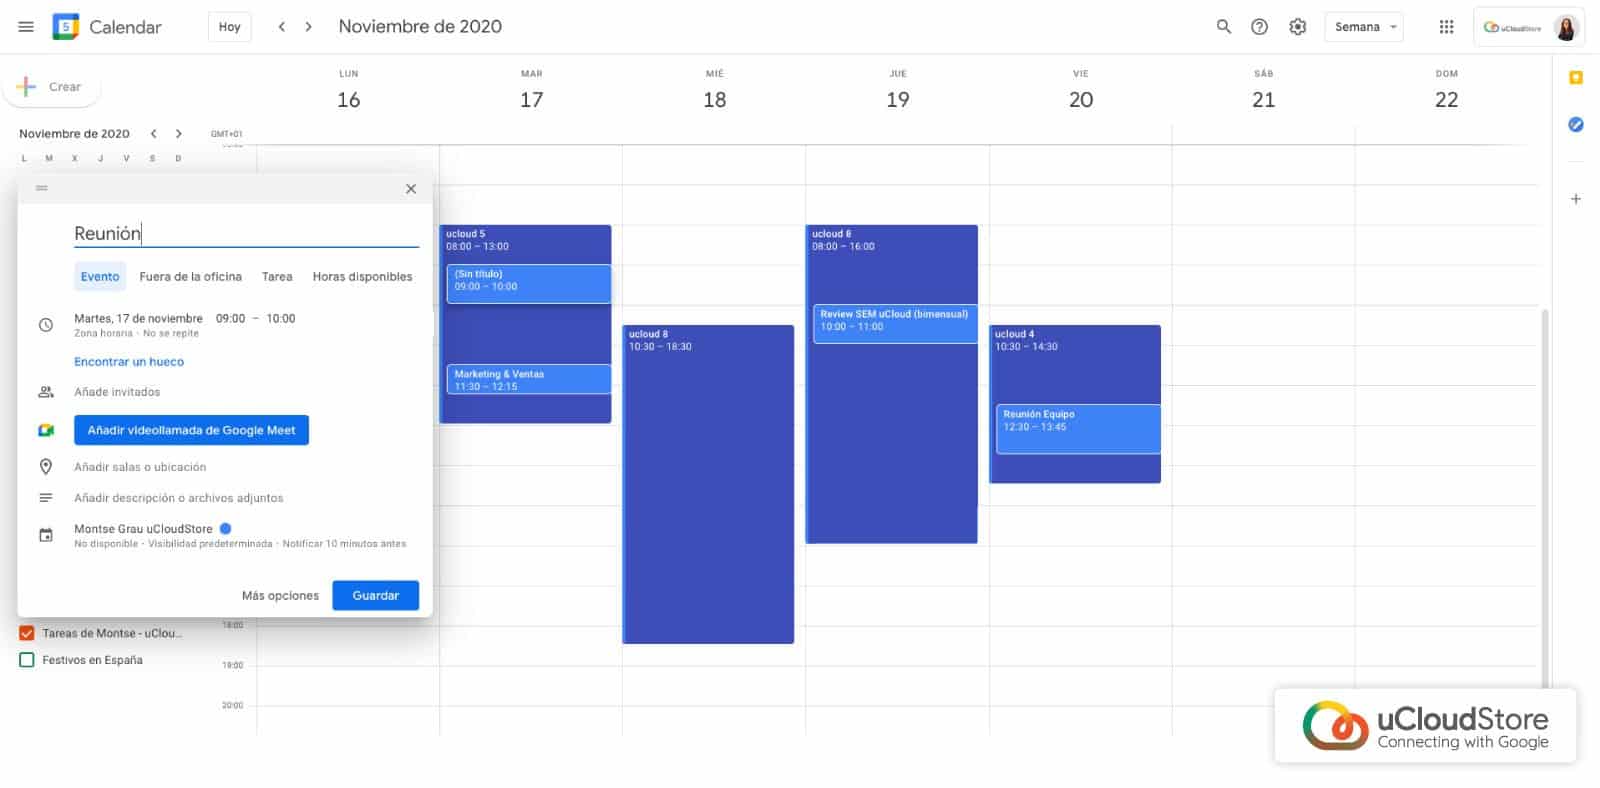 Image of creating Google Meet events from Calendar